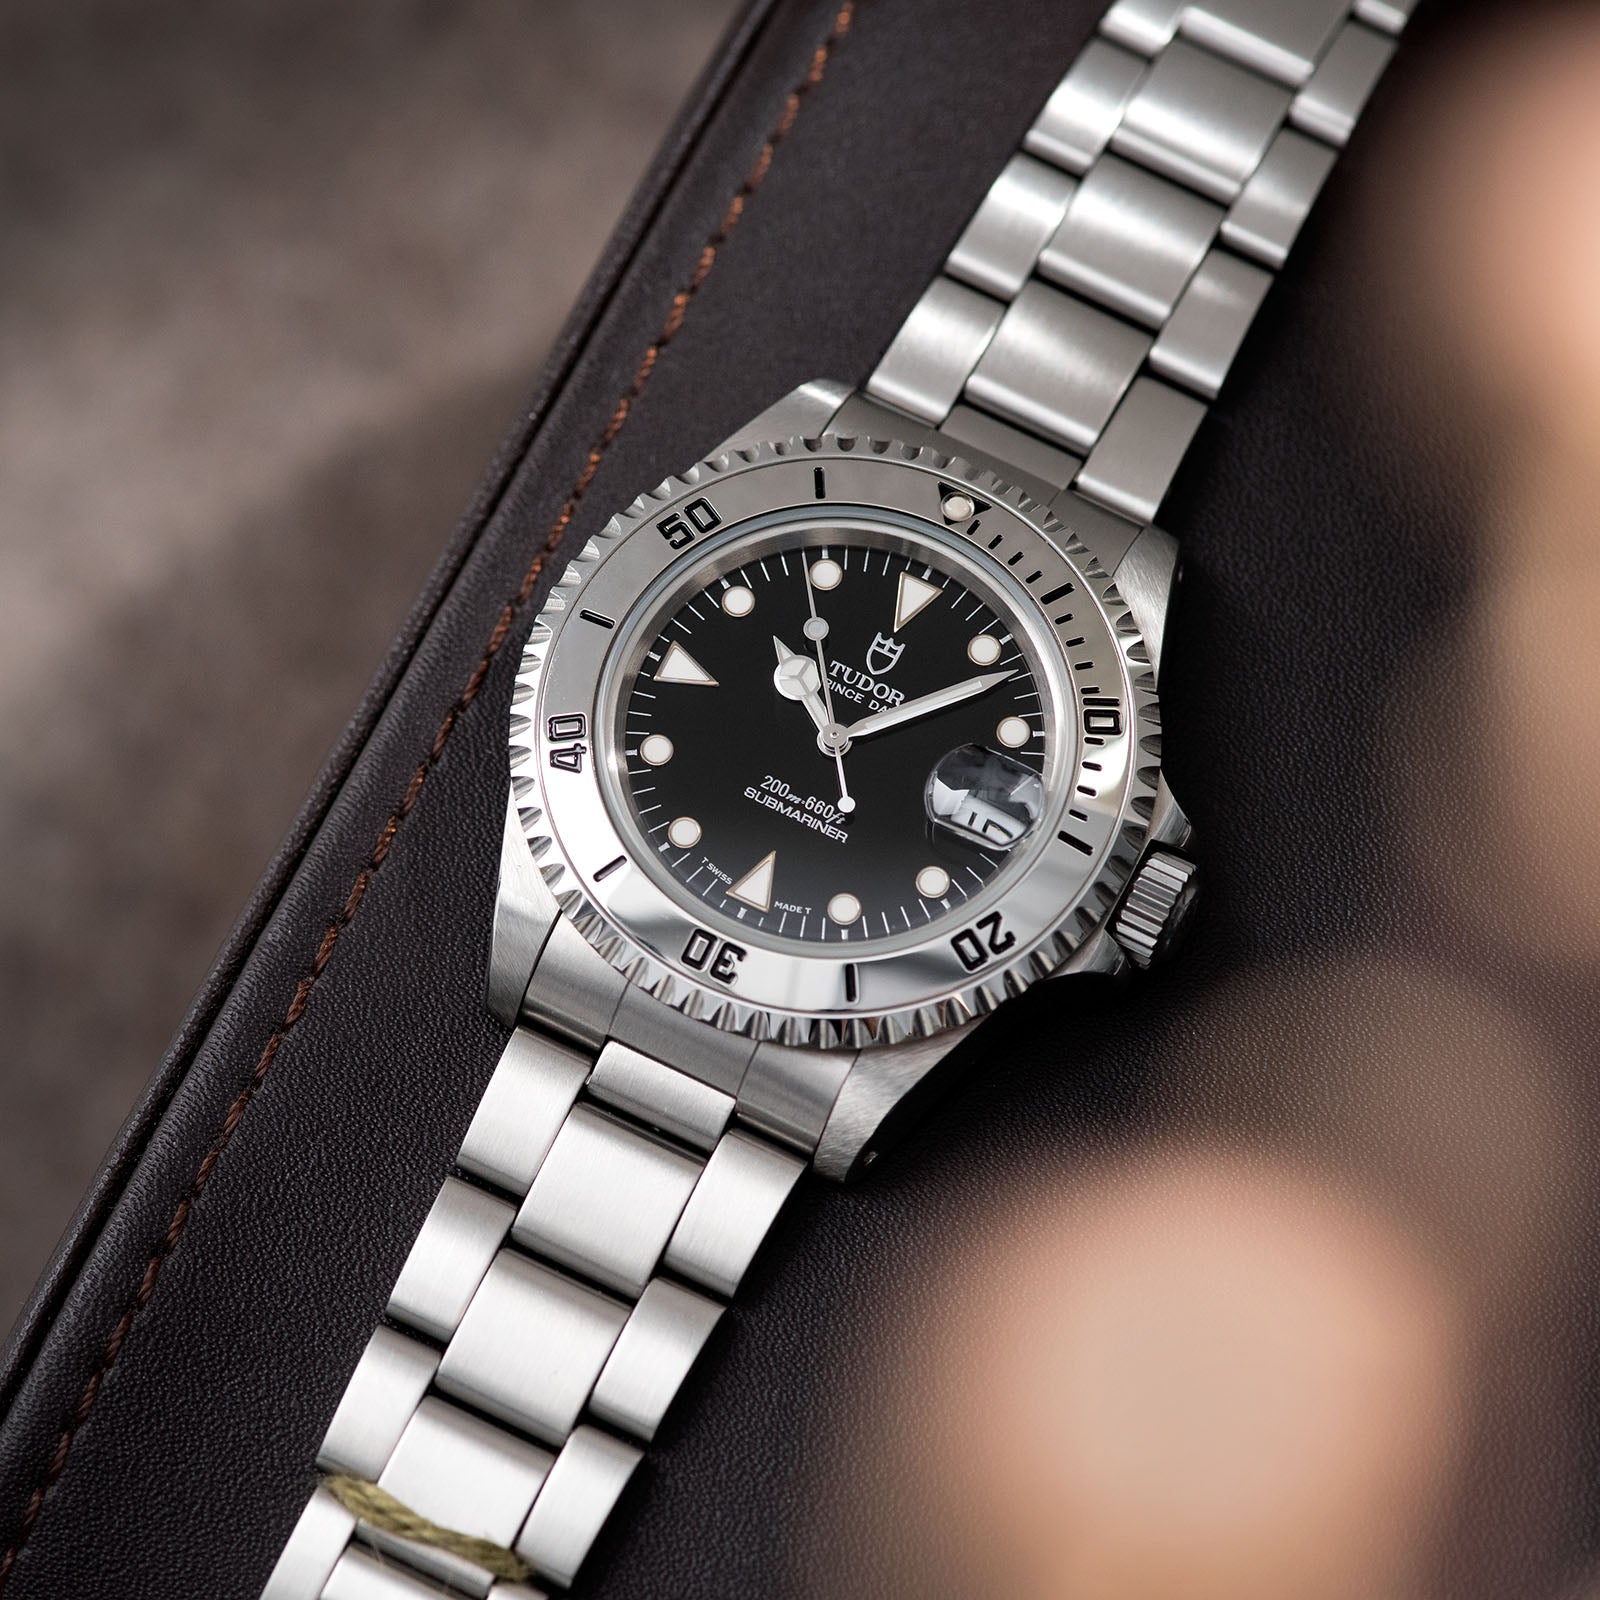 Tudor’s End Game – The 79190 Submariner